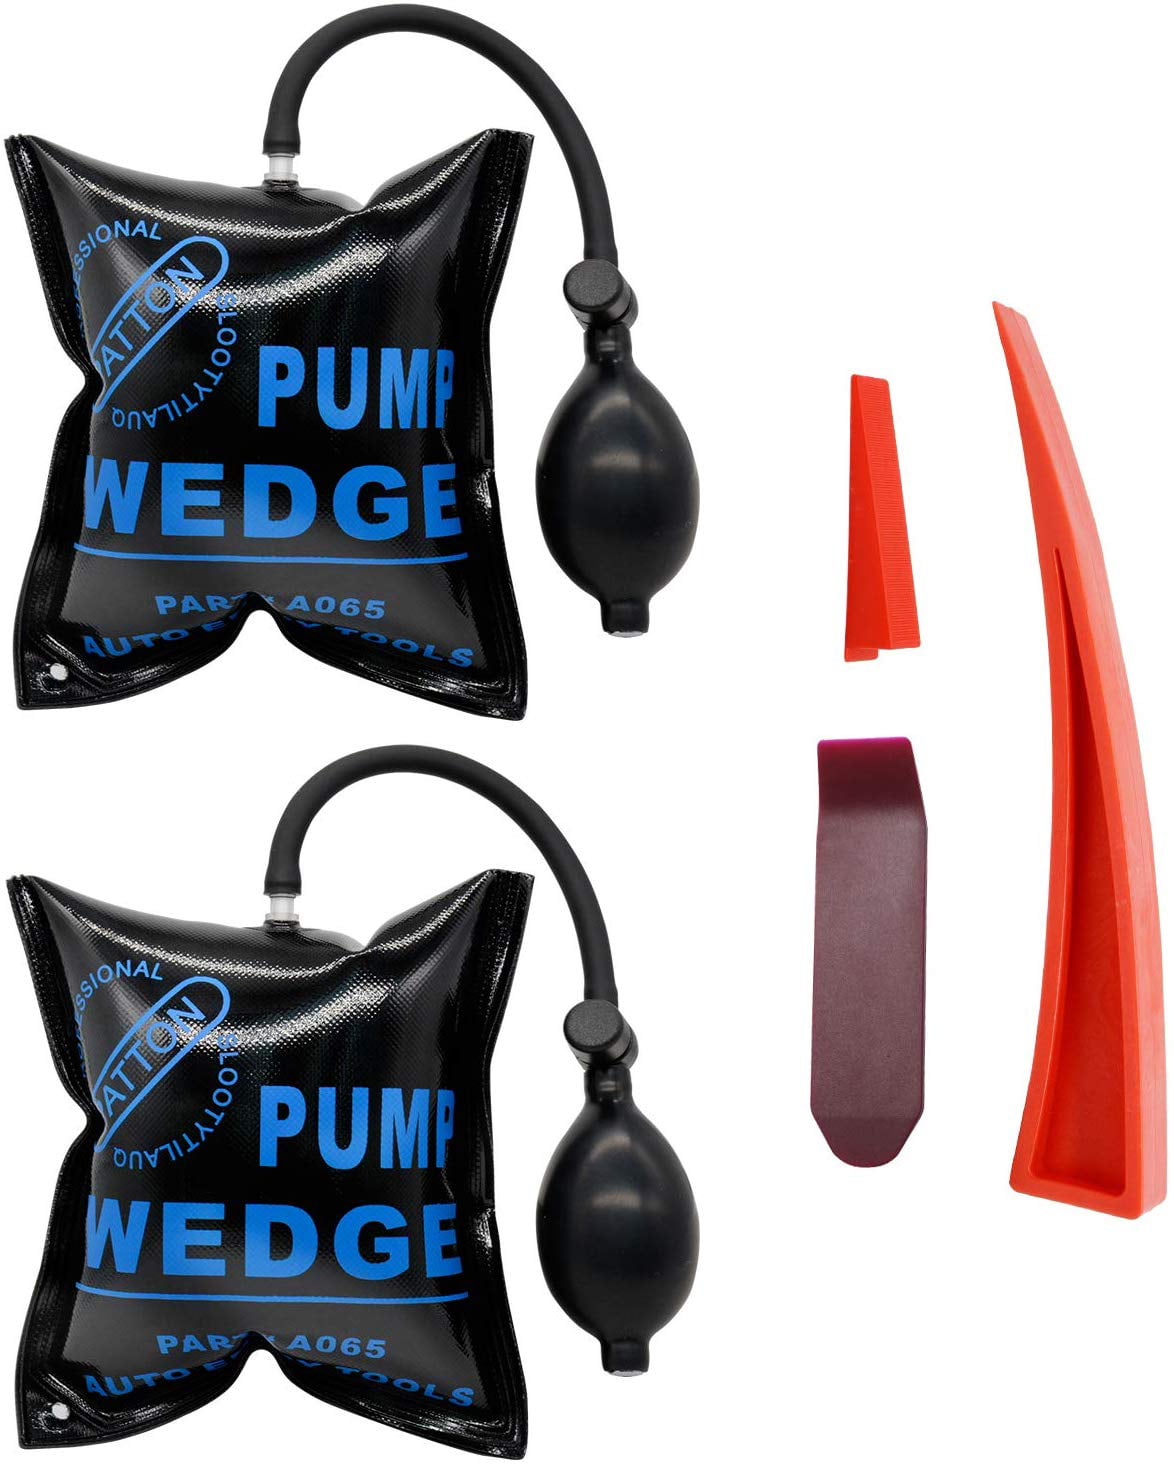 2 Pcs Air Pump Wedge Up Bag Wedge Pump Alignment Tool for Home Use Door Window Installation and Auto Repair 